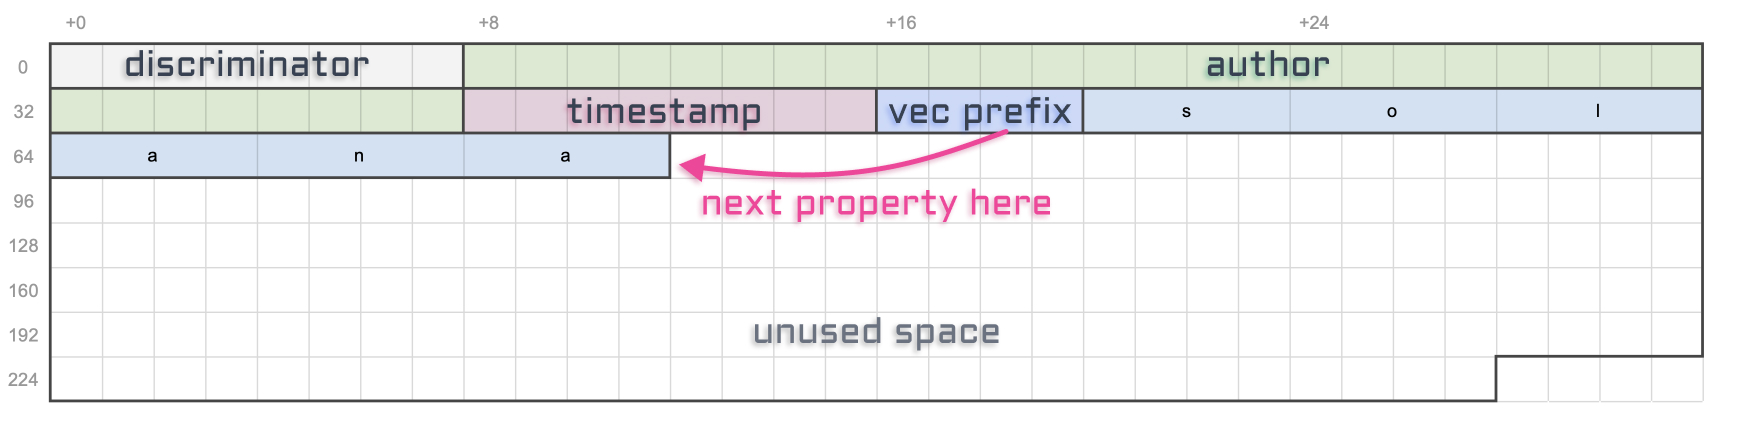 Same table as before but with 24 bytes instead of 200 bytes in the topic section. An arrow starting from the "vec prefix" section points to the end of the 24 bytes to illustrate that the vector prefix lets us know where the next property starts.